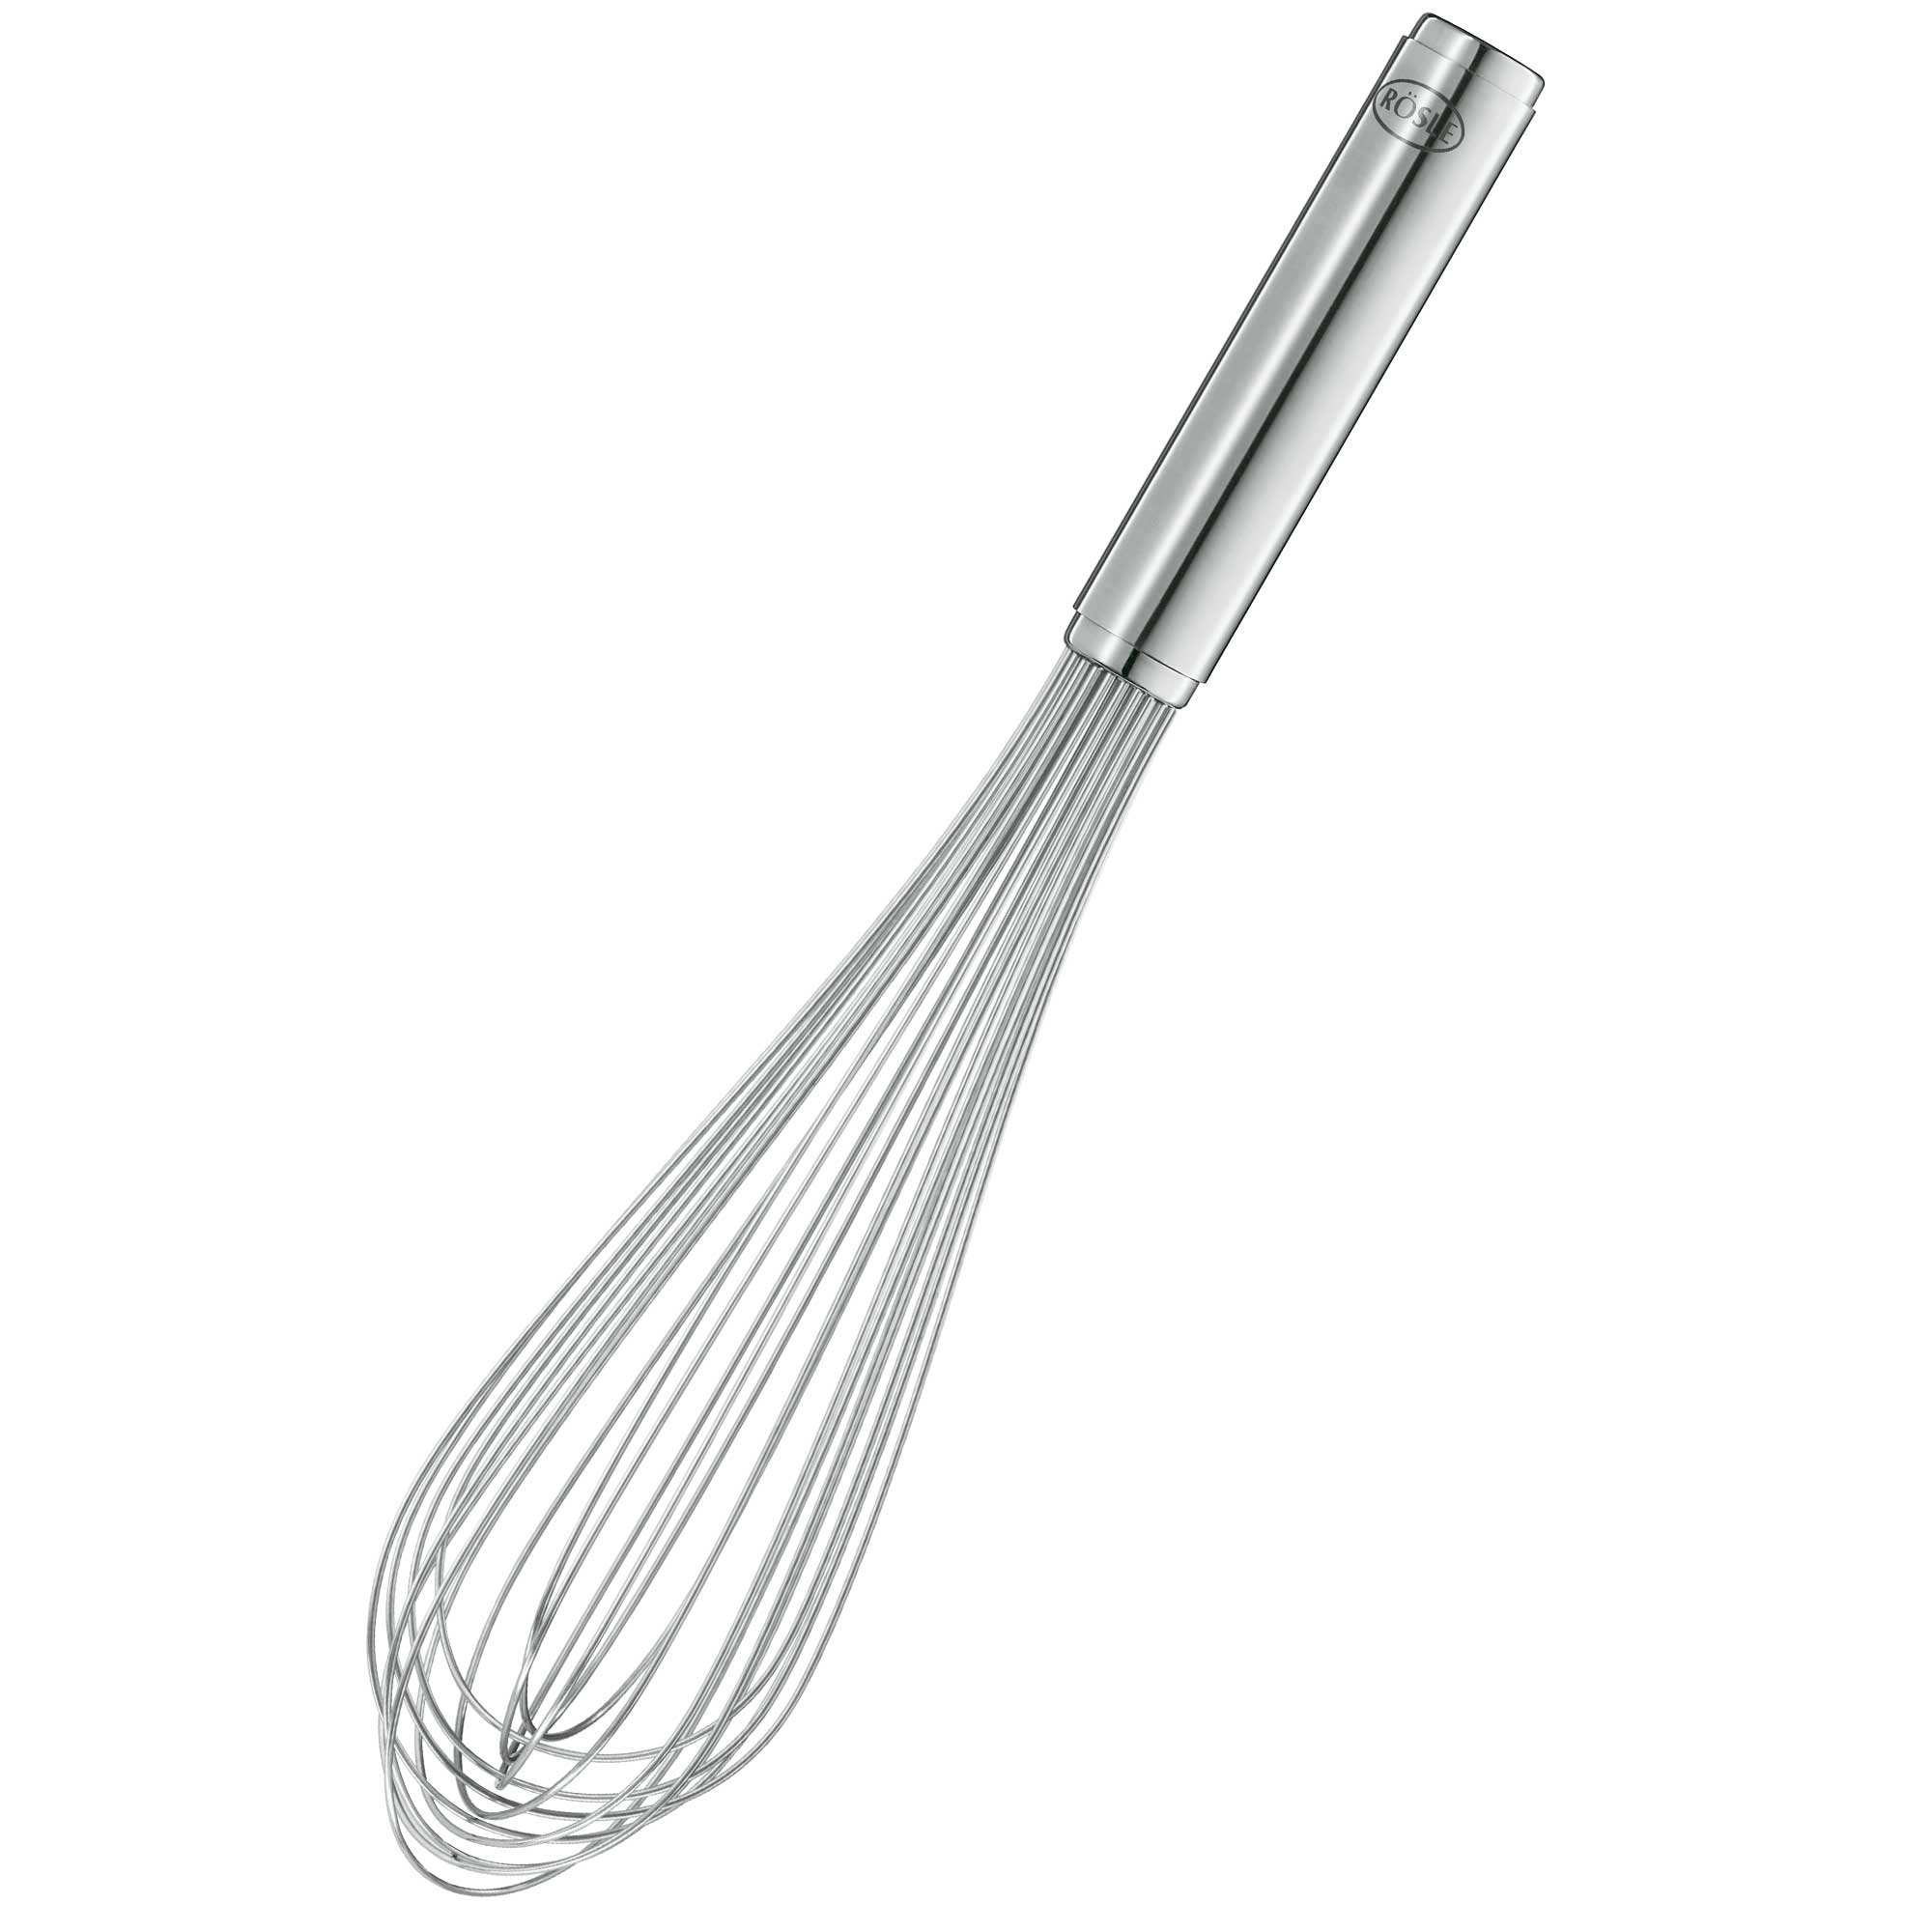 Balloon Whisk/Beater 35 cm | 13.8 in. Classic